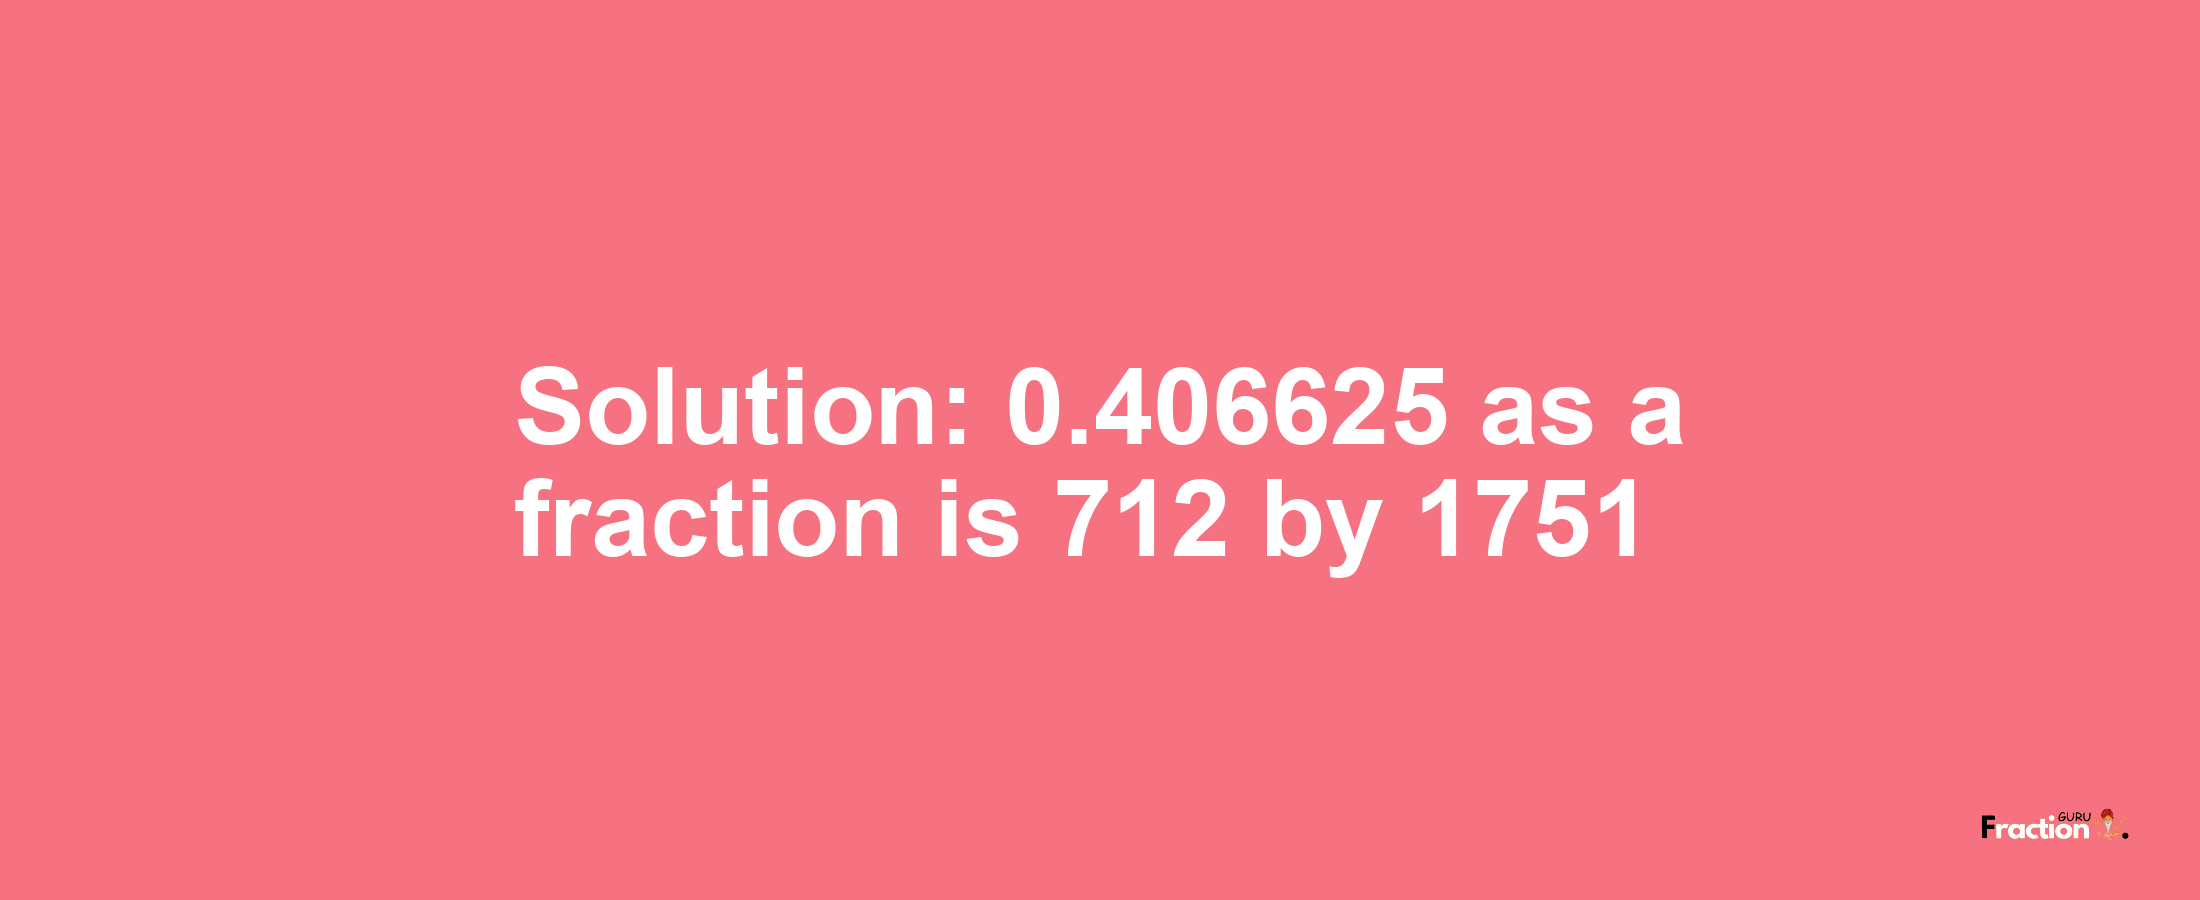 Solution:0.406625 as a fraction is 712/1751